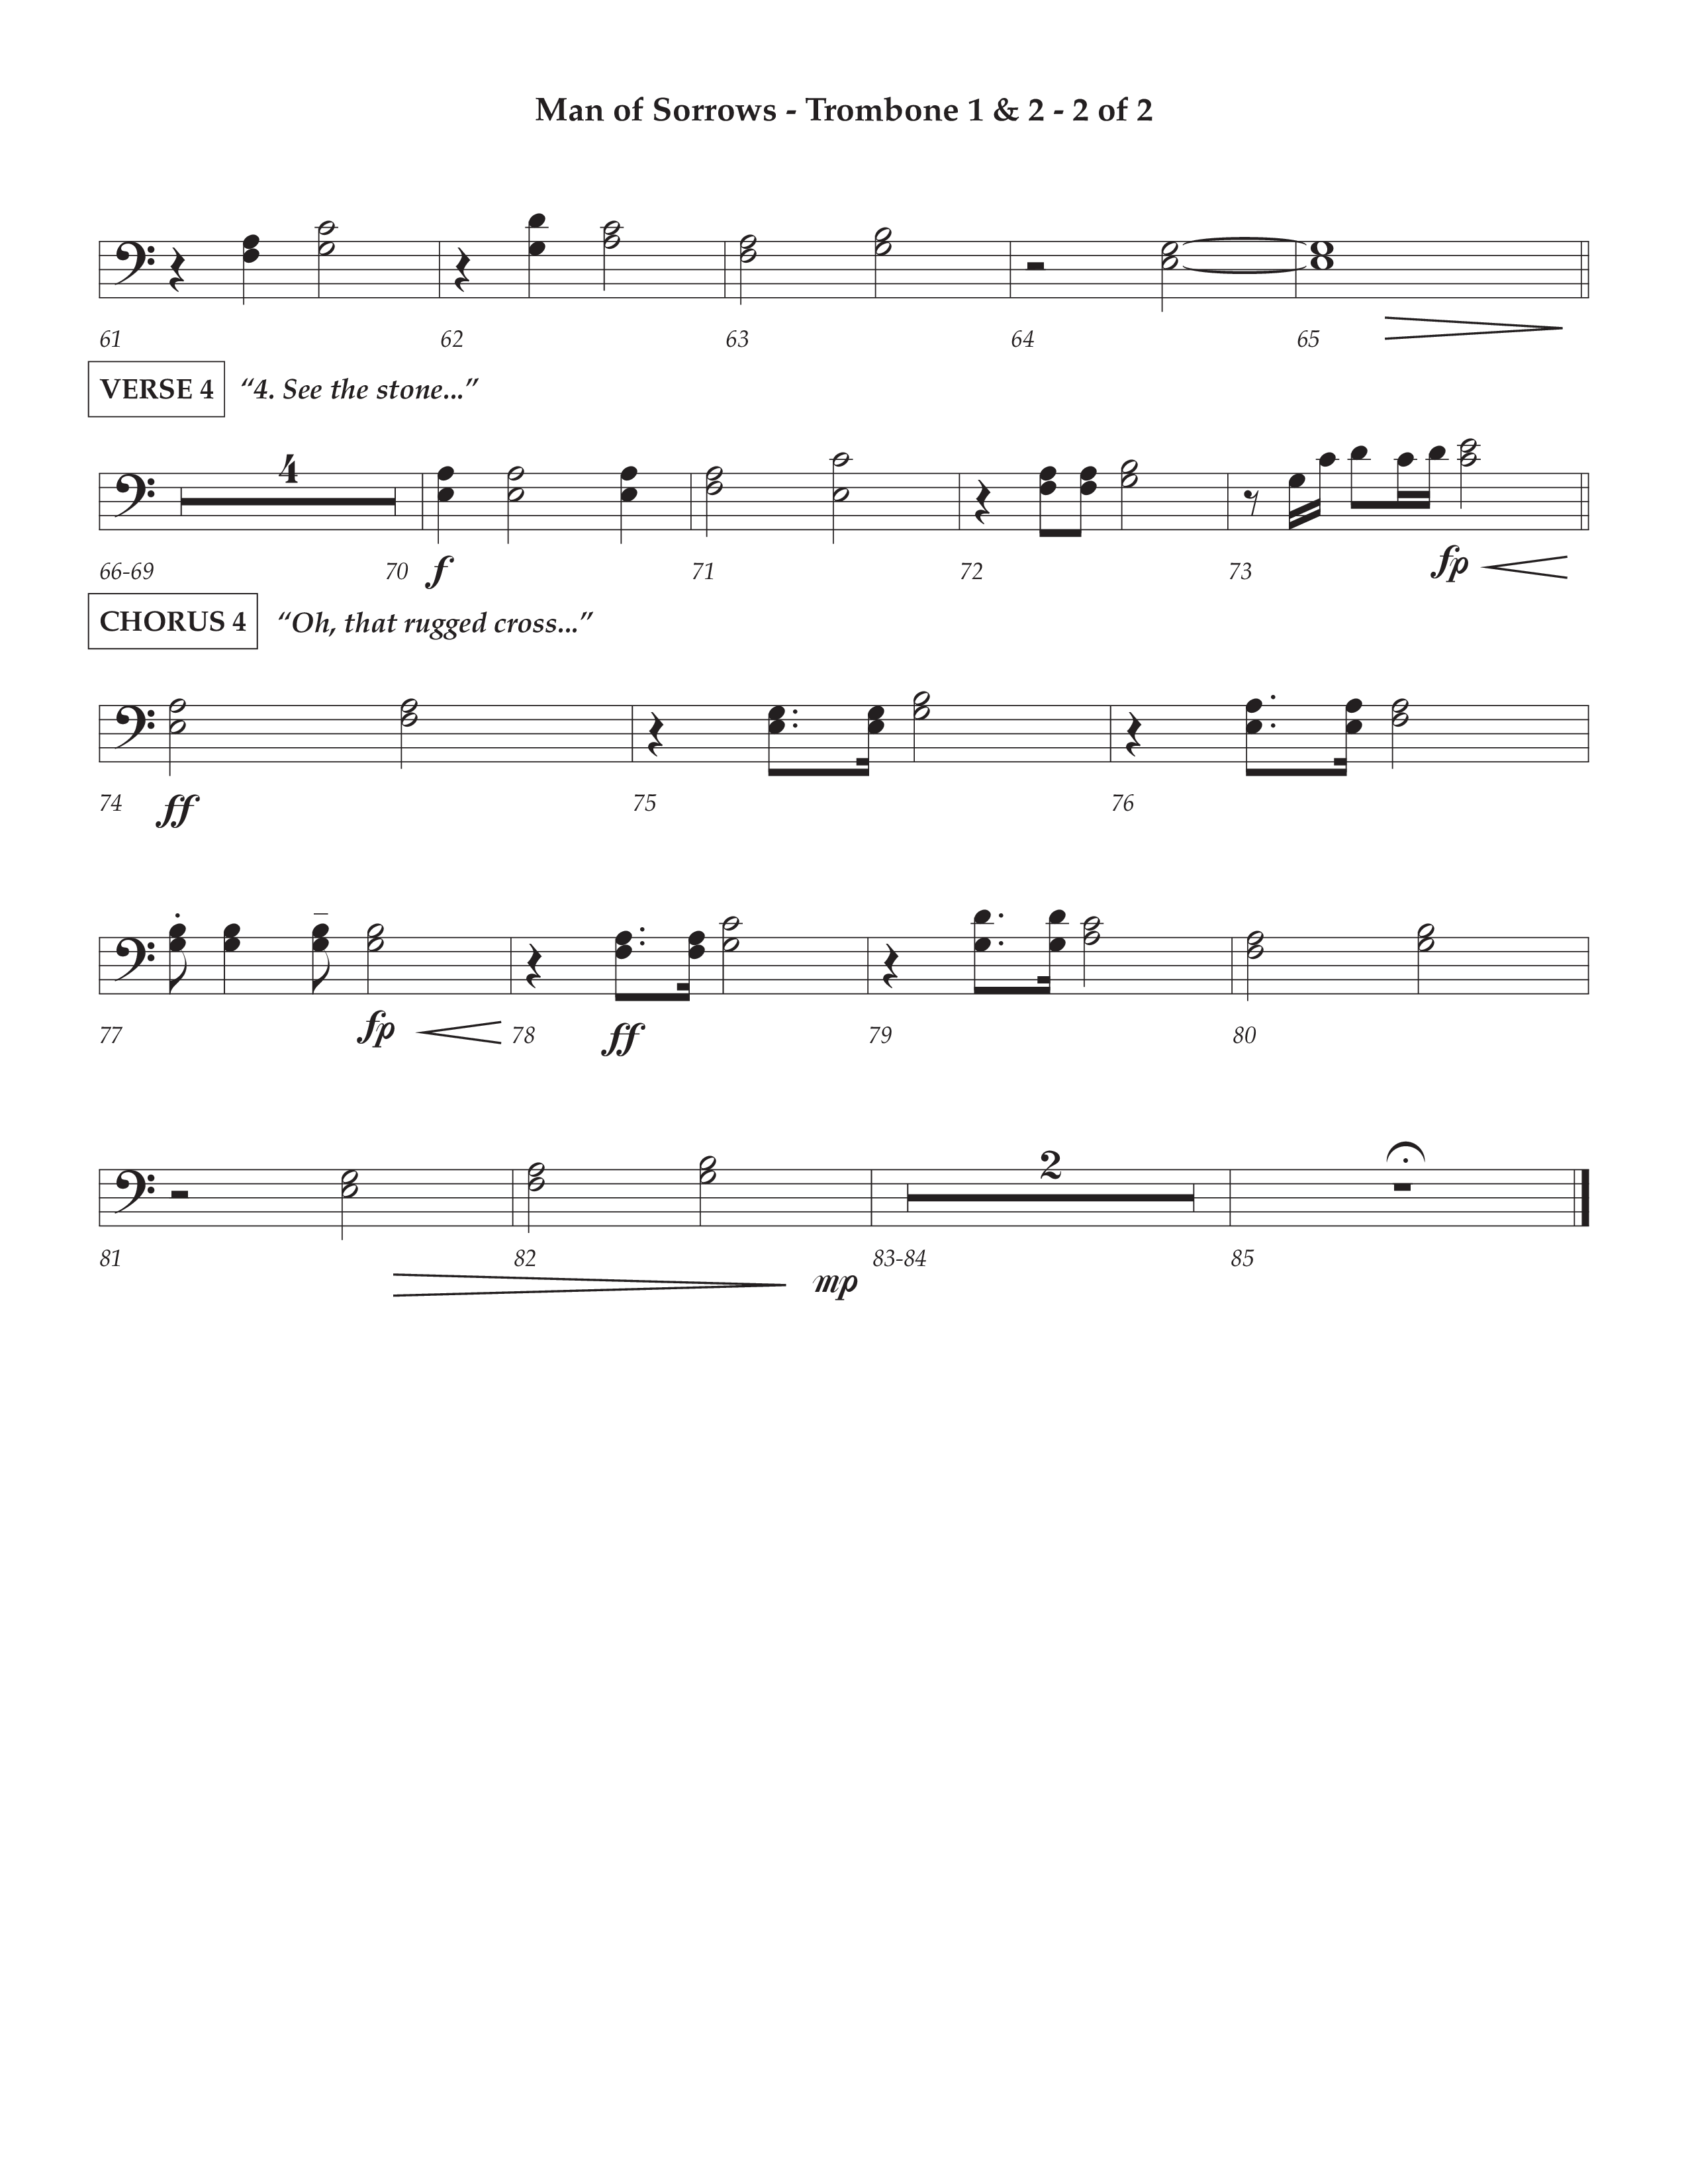 Man Of Sorrows (Choral Anthem SATB) Trombone 1/2 (Lifeway Choral / Arr. Cliff Duren / Orch. Keith Christopher)